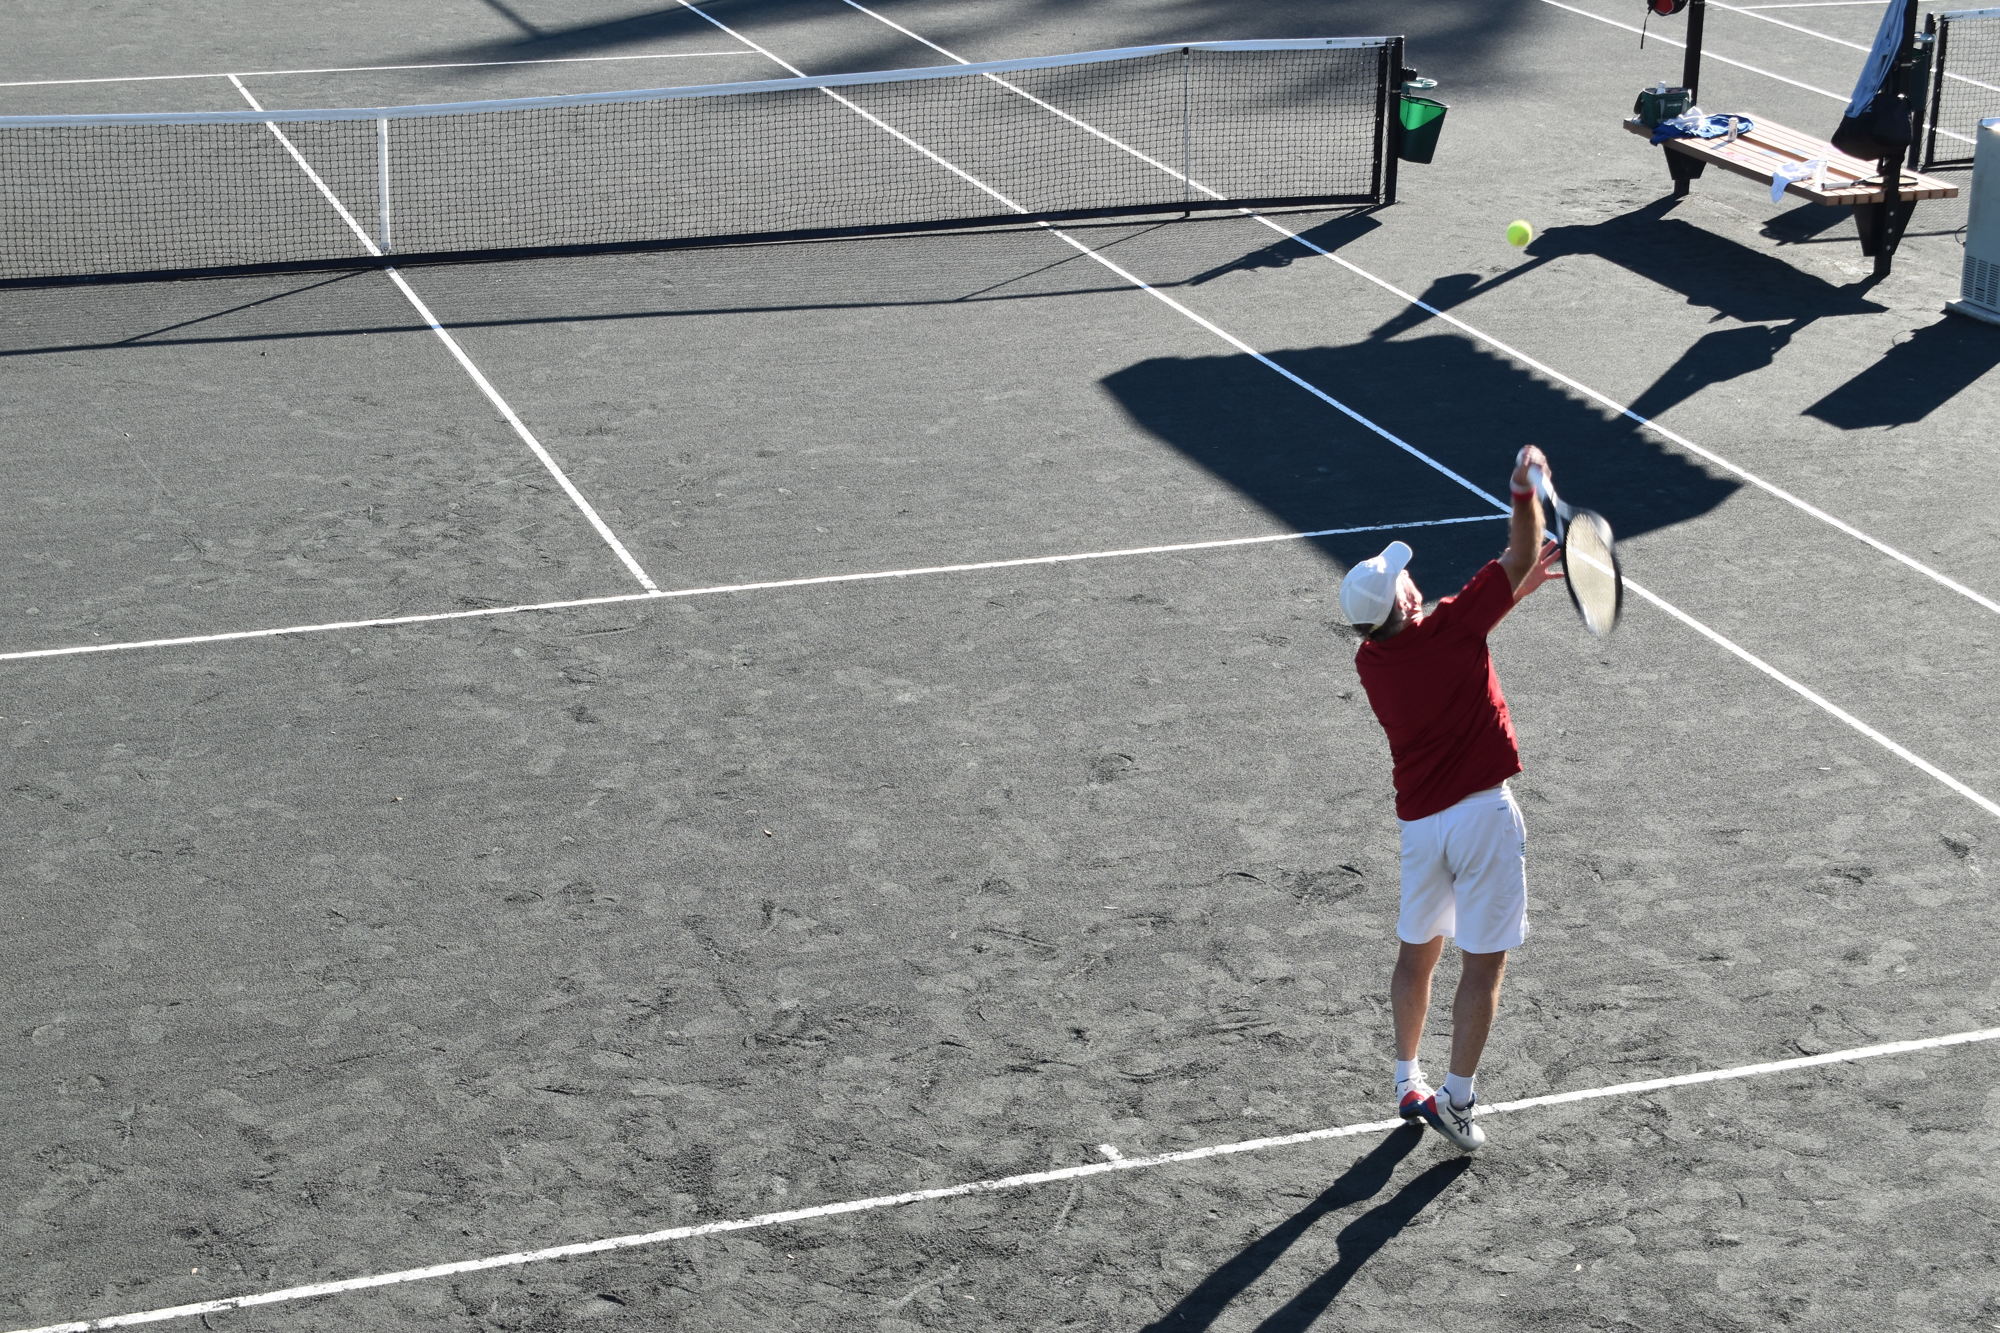 A player prepares a serve Monday in the tournament at the Longboat Key Public Tennis Center.